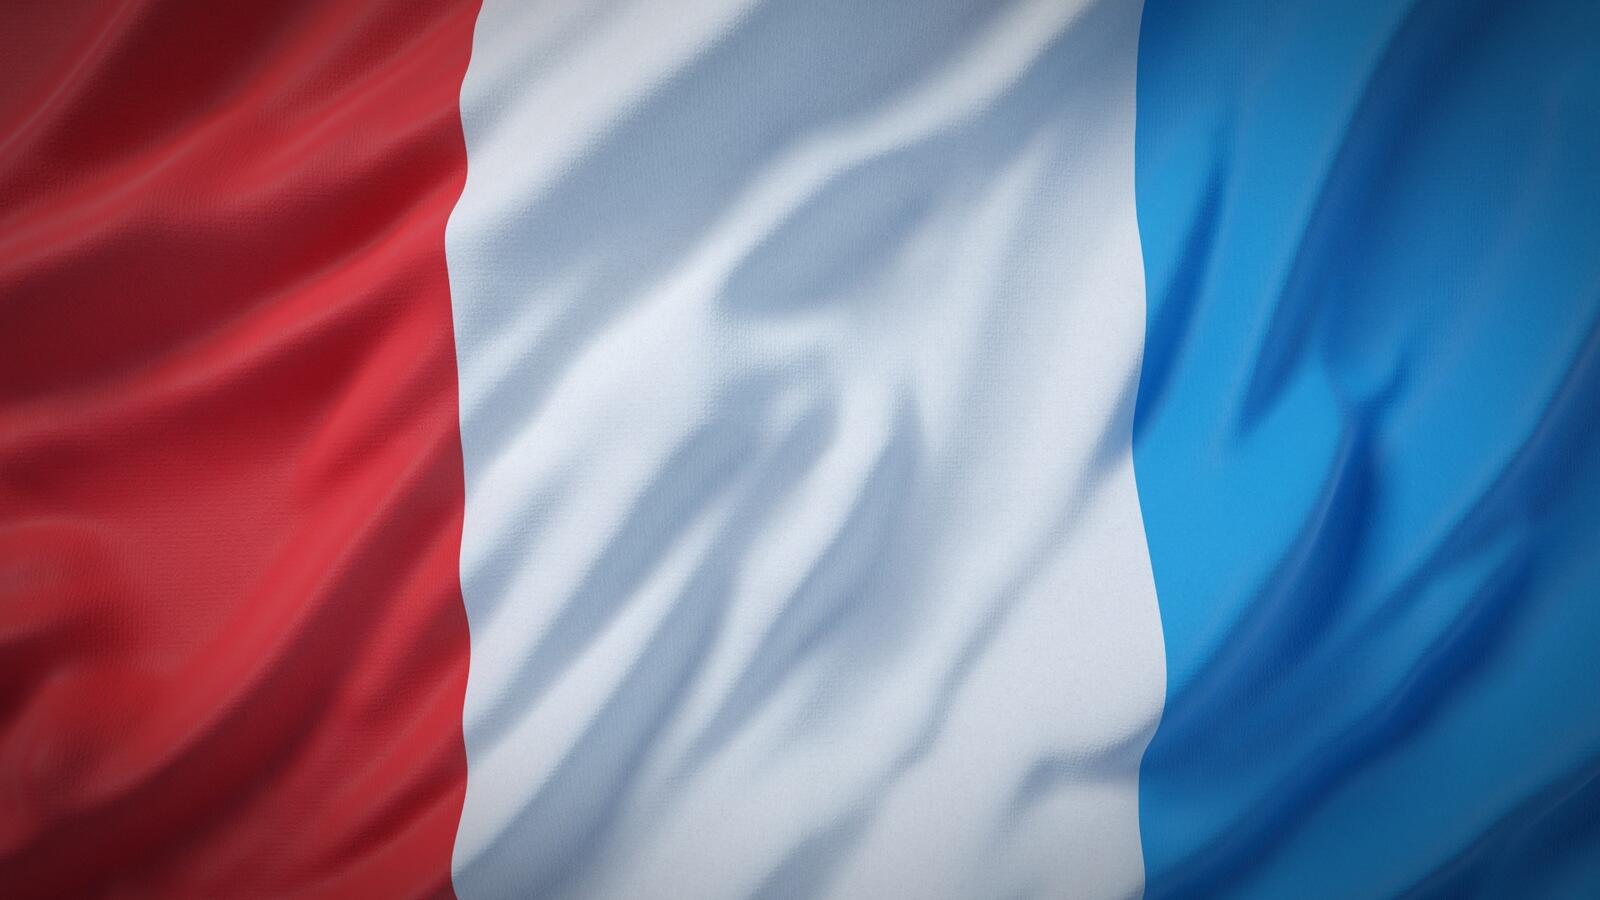 Wallpapers France Europe red on the desktop